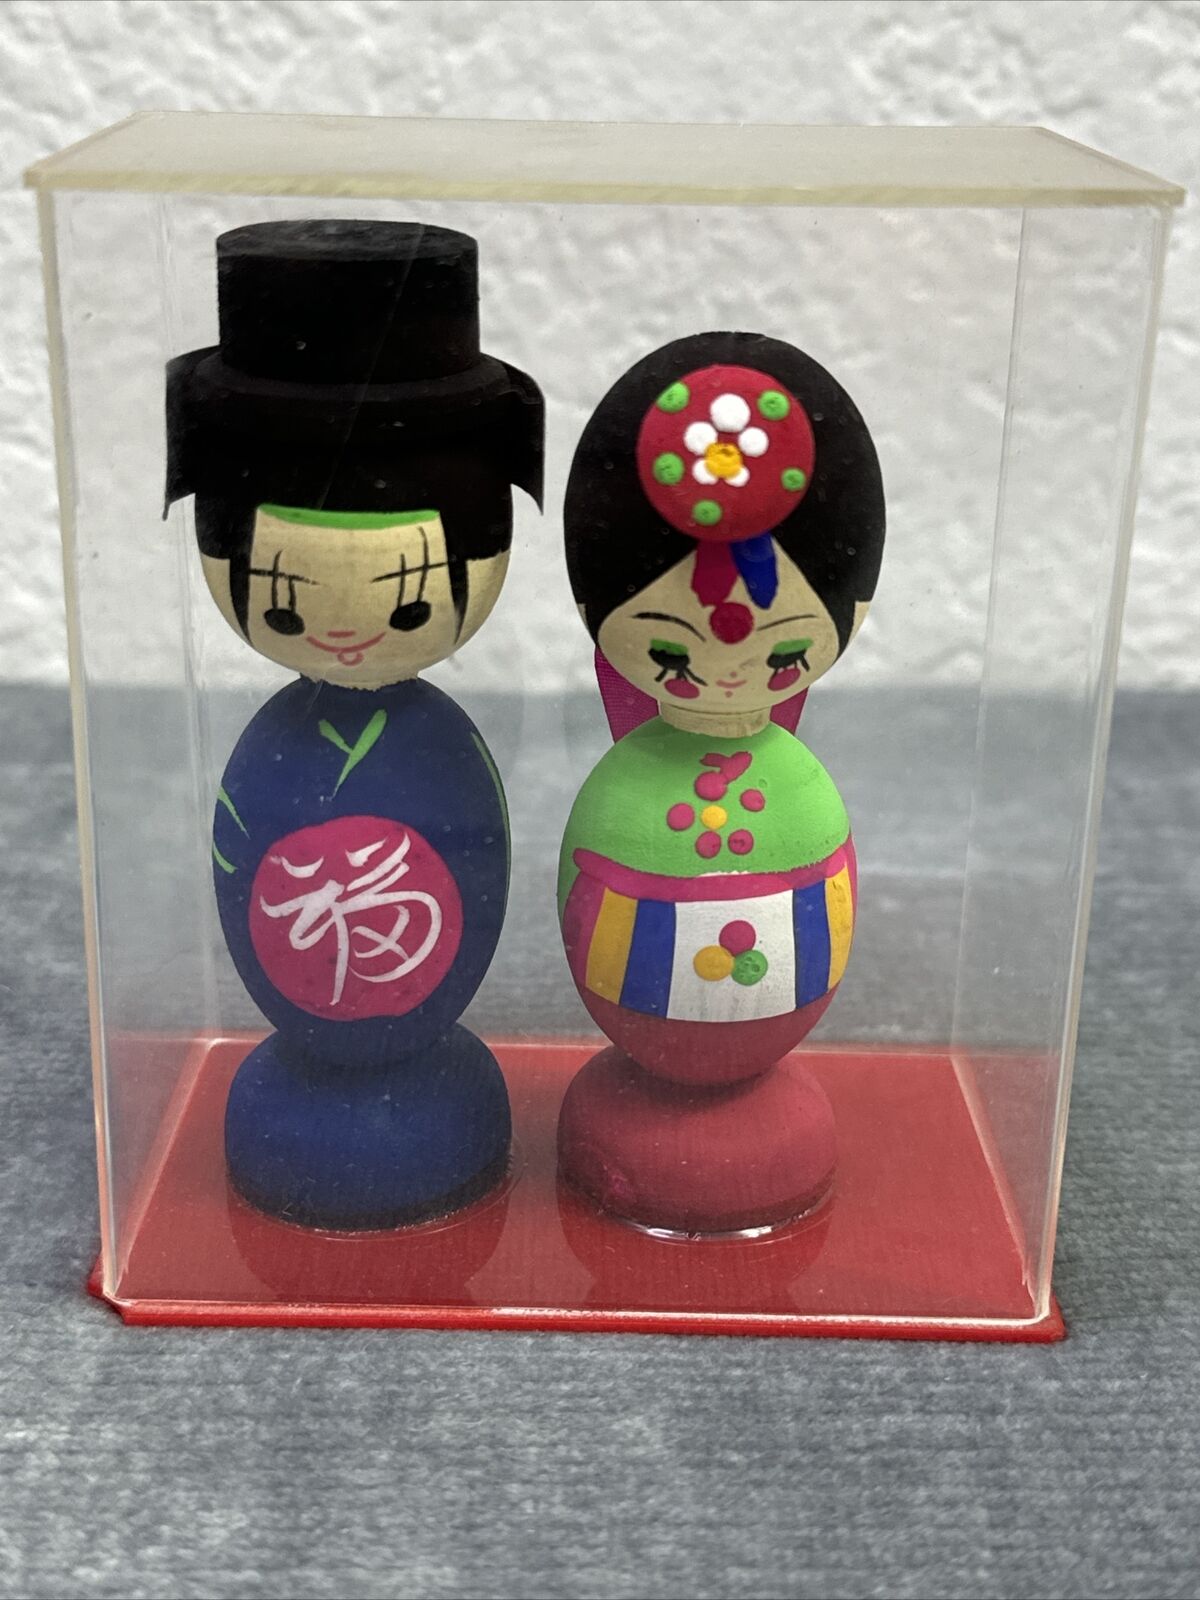 CARVED WOOD KOREAN WEDDING DOLLS HAND PAINTED WOODEN 3.25” TALL